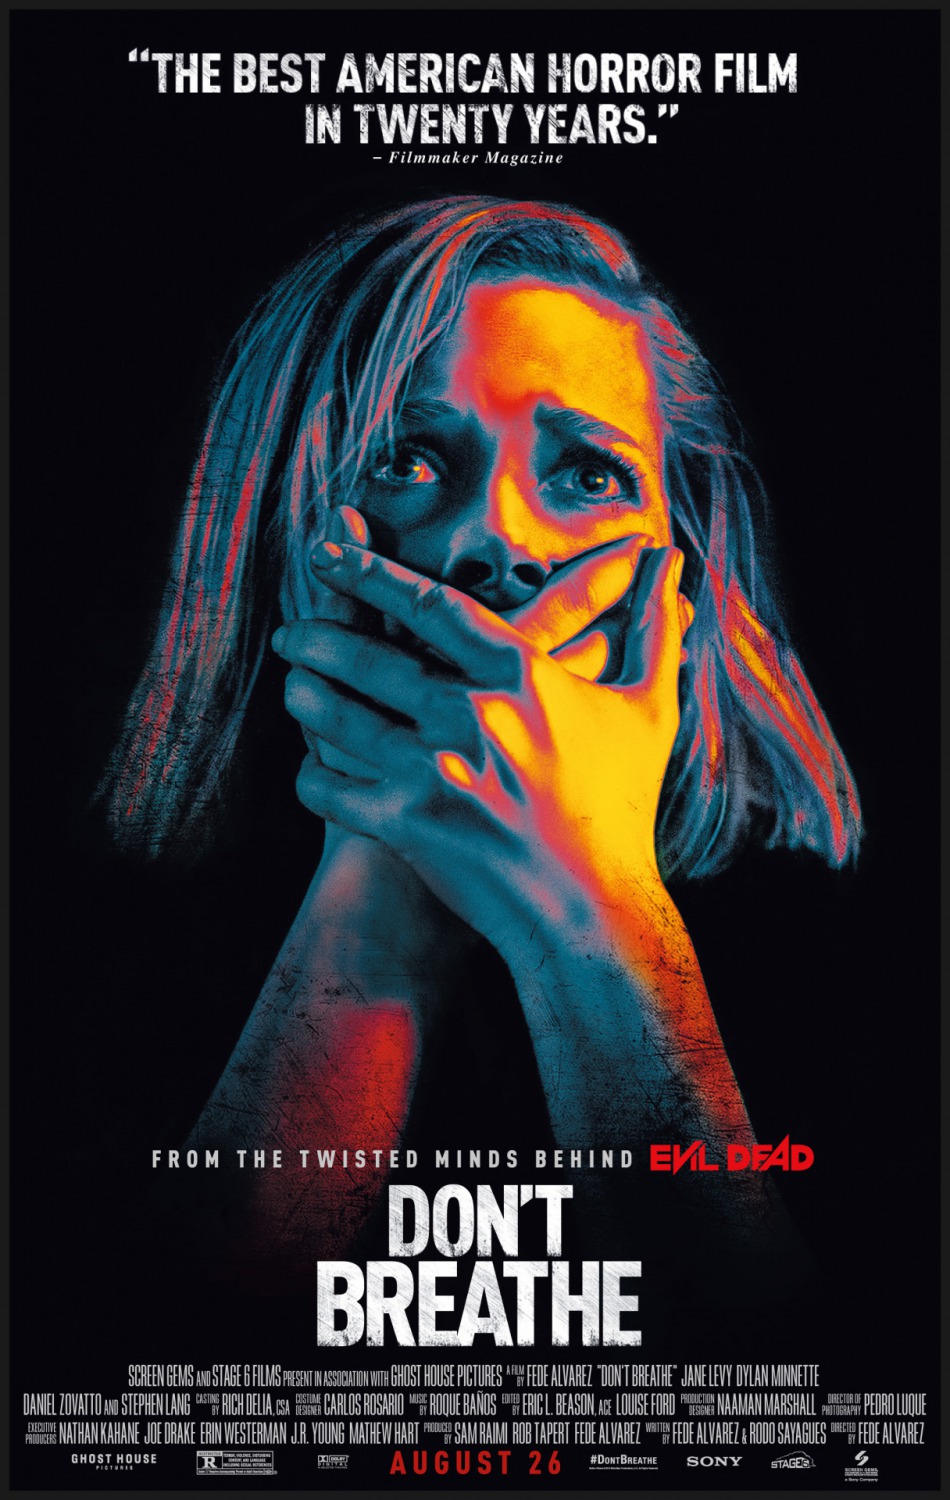 Don’t Breathe film review: night terrors